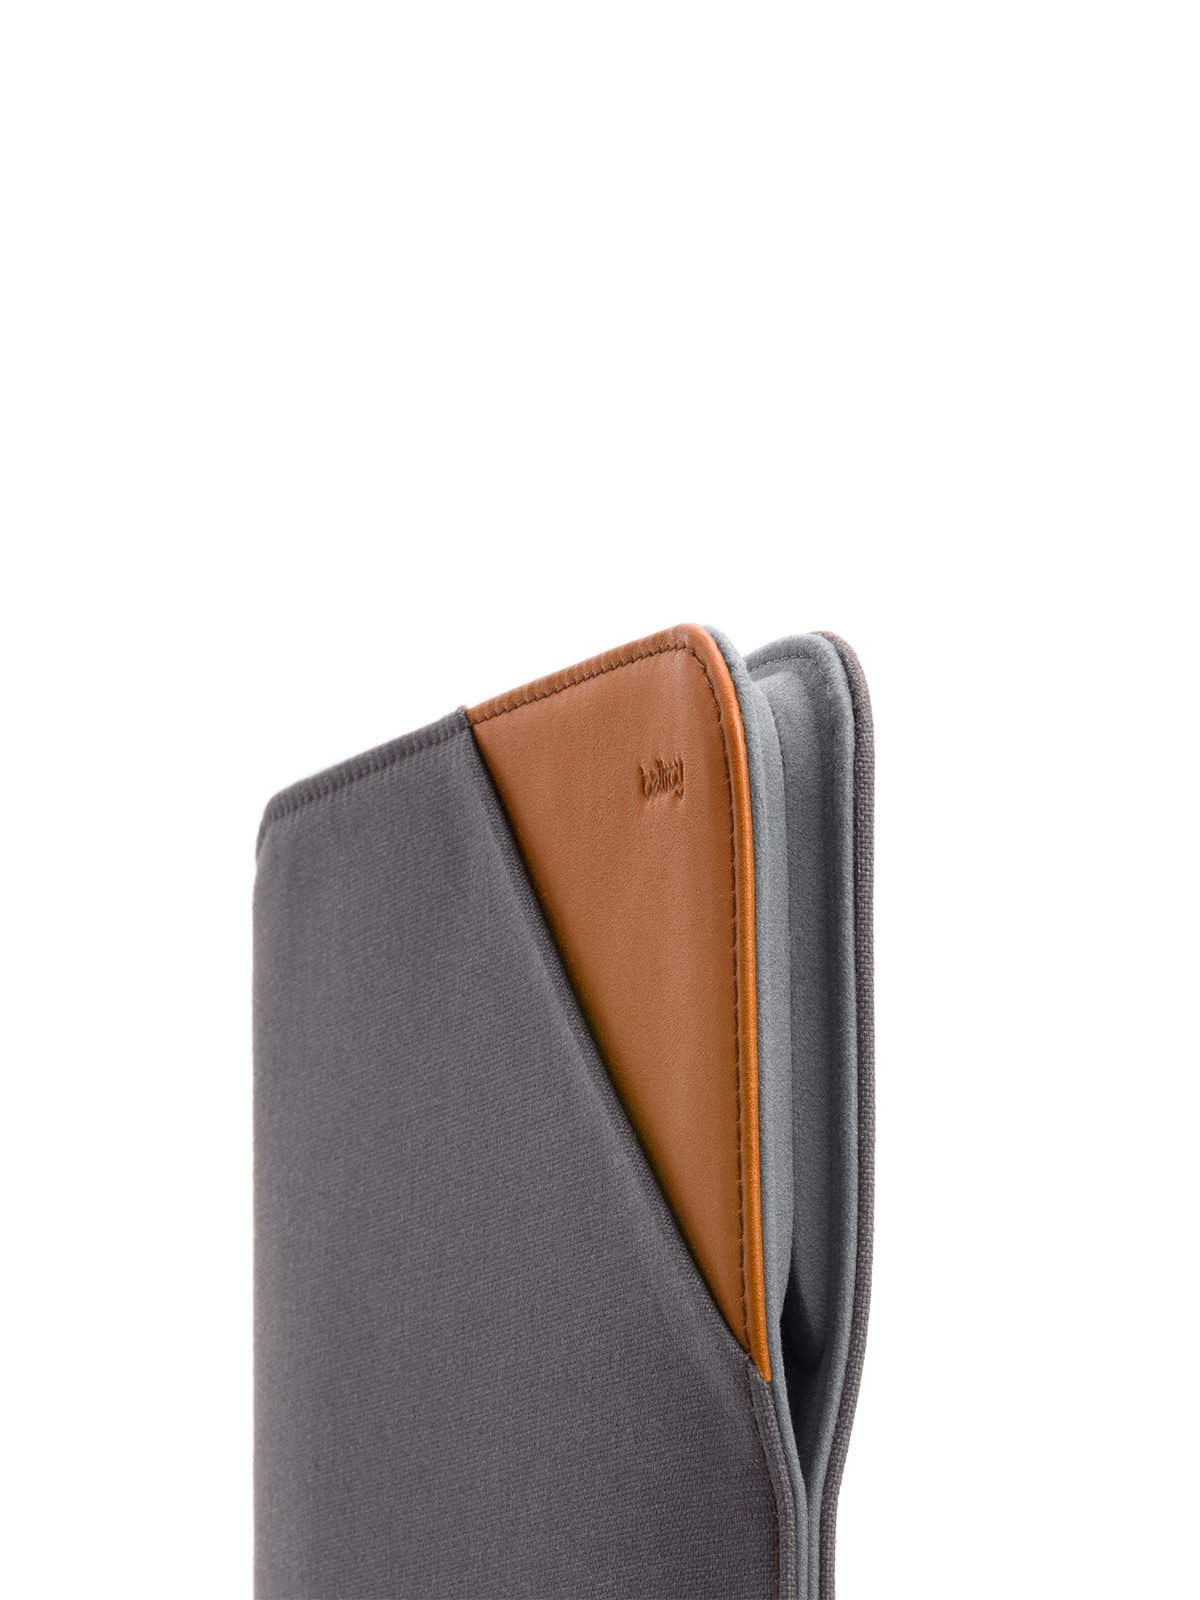 Bellroy Tablet Sleeve 10 Inch Warm Grey Woven - MORE by Morello Indonesia